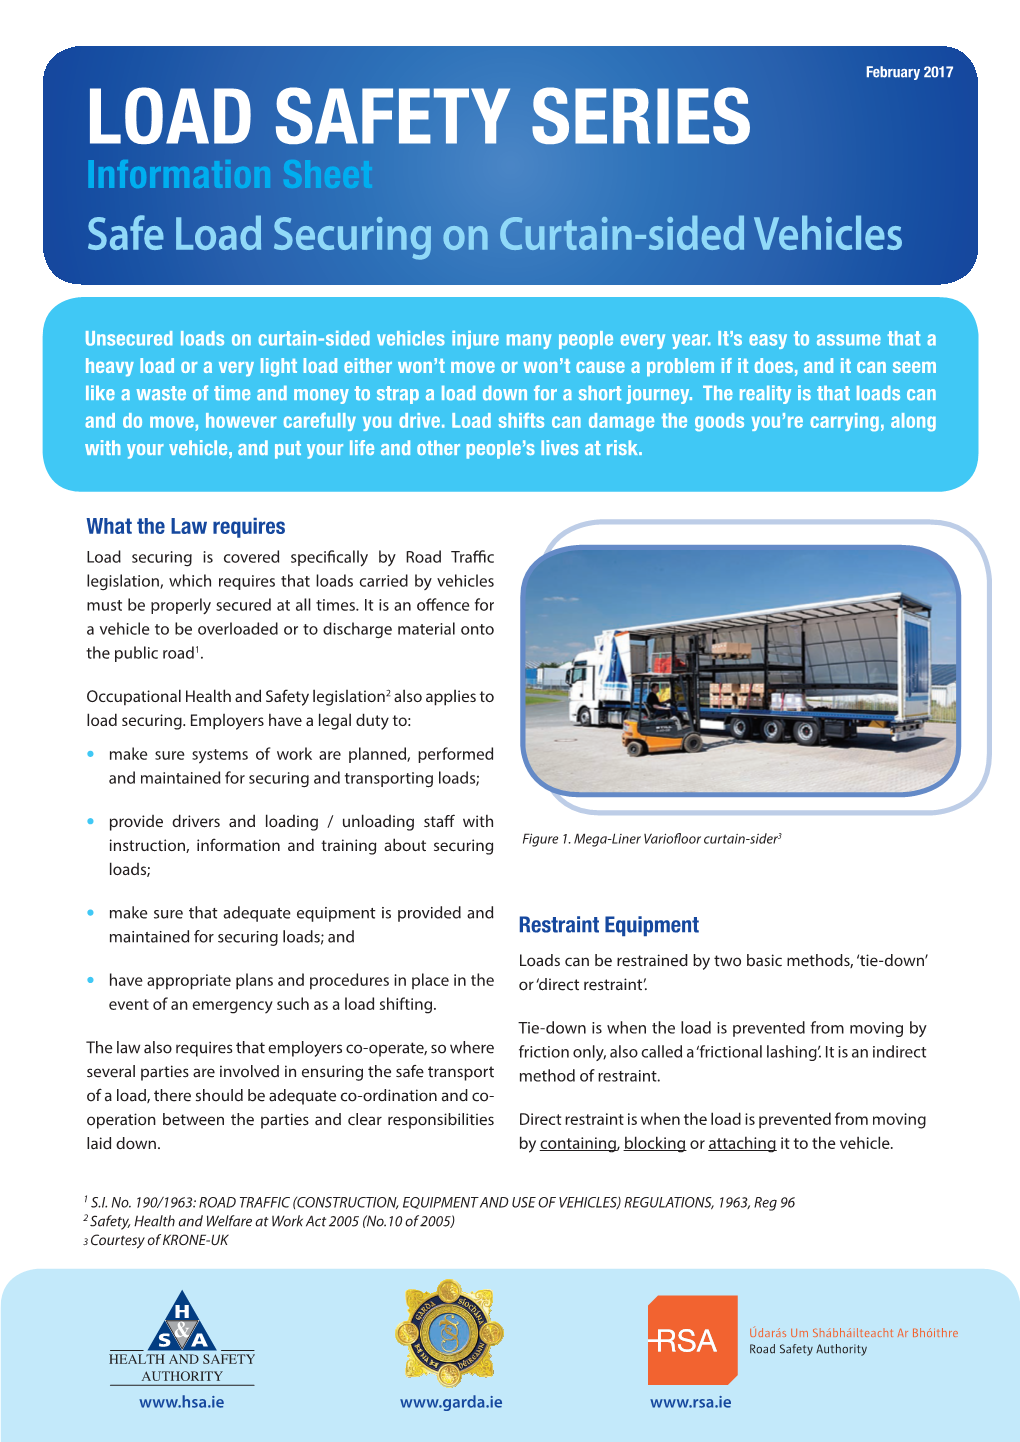 LOAD SAFETY SERIES Information Sheet Safe Load Securing on Curtain-Sided Vehicles